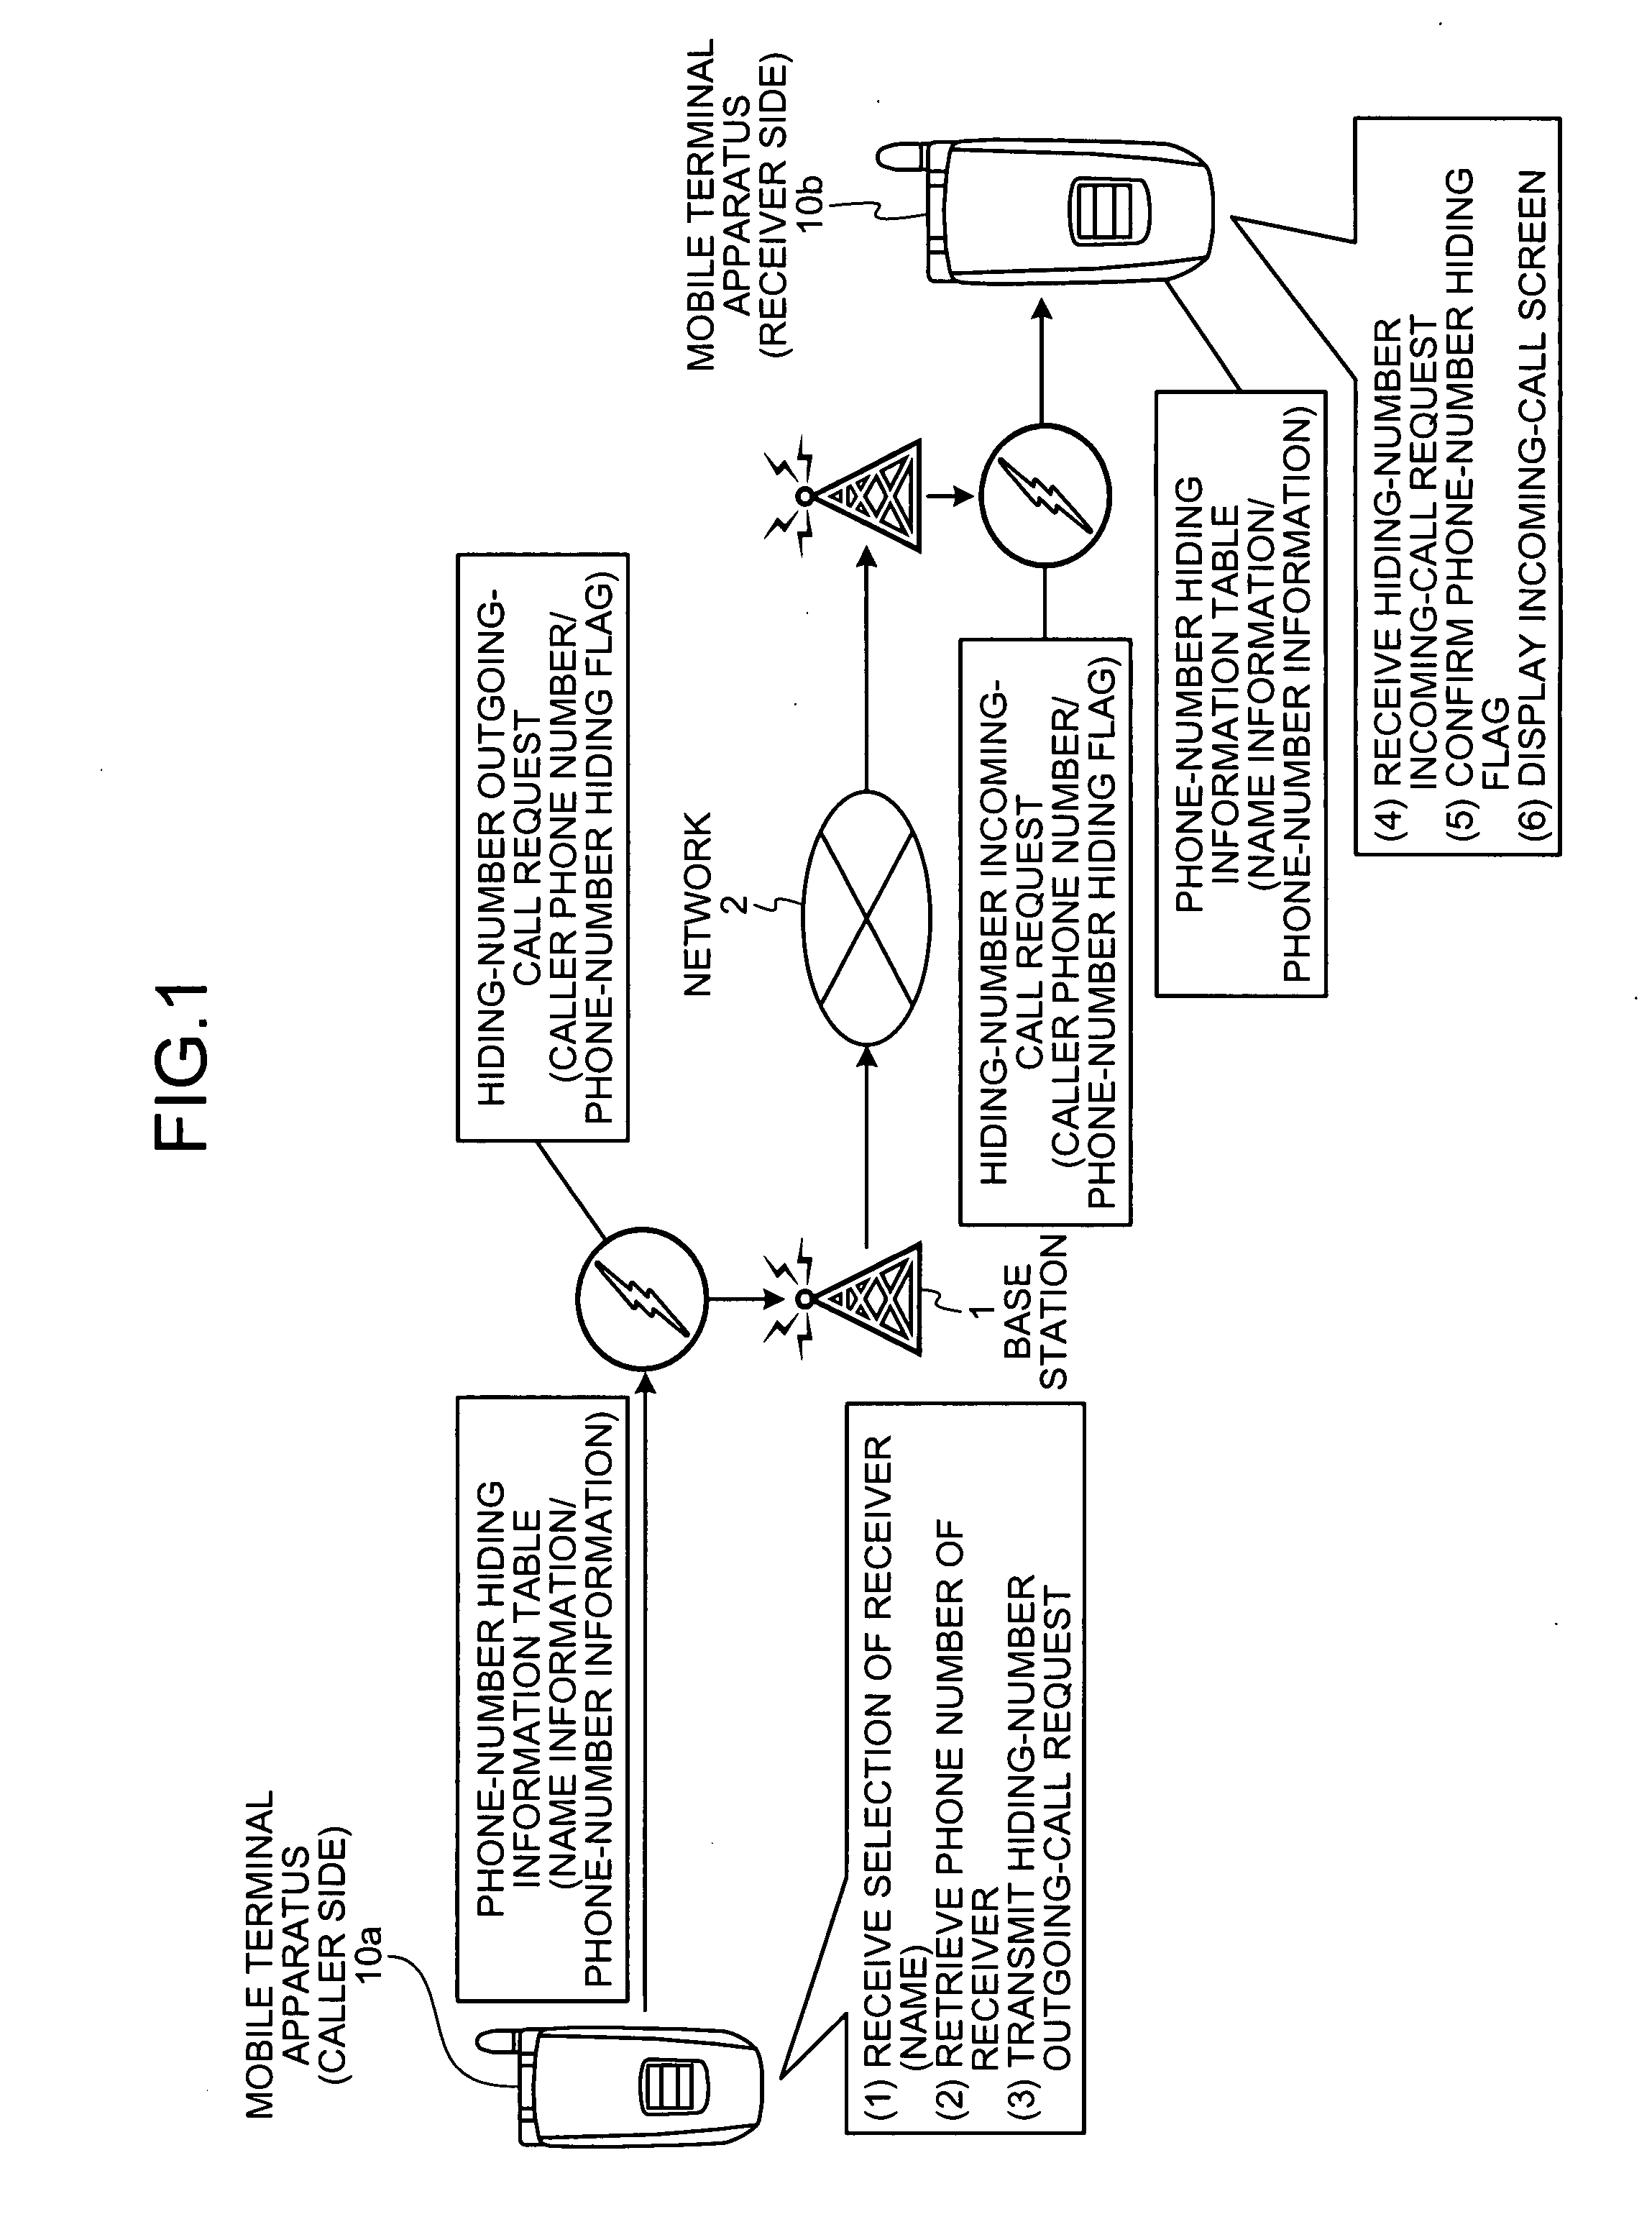 Mobile terminal apparatus, method of controlling transmission and reception of request, and computer product